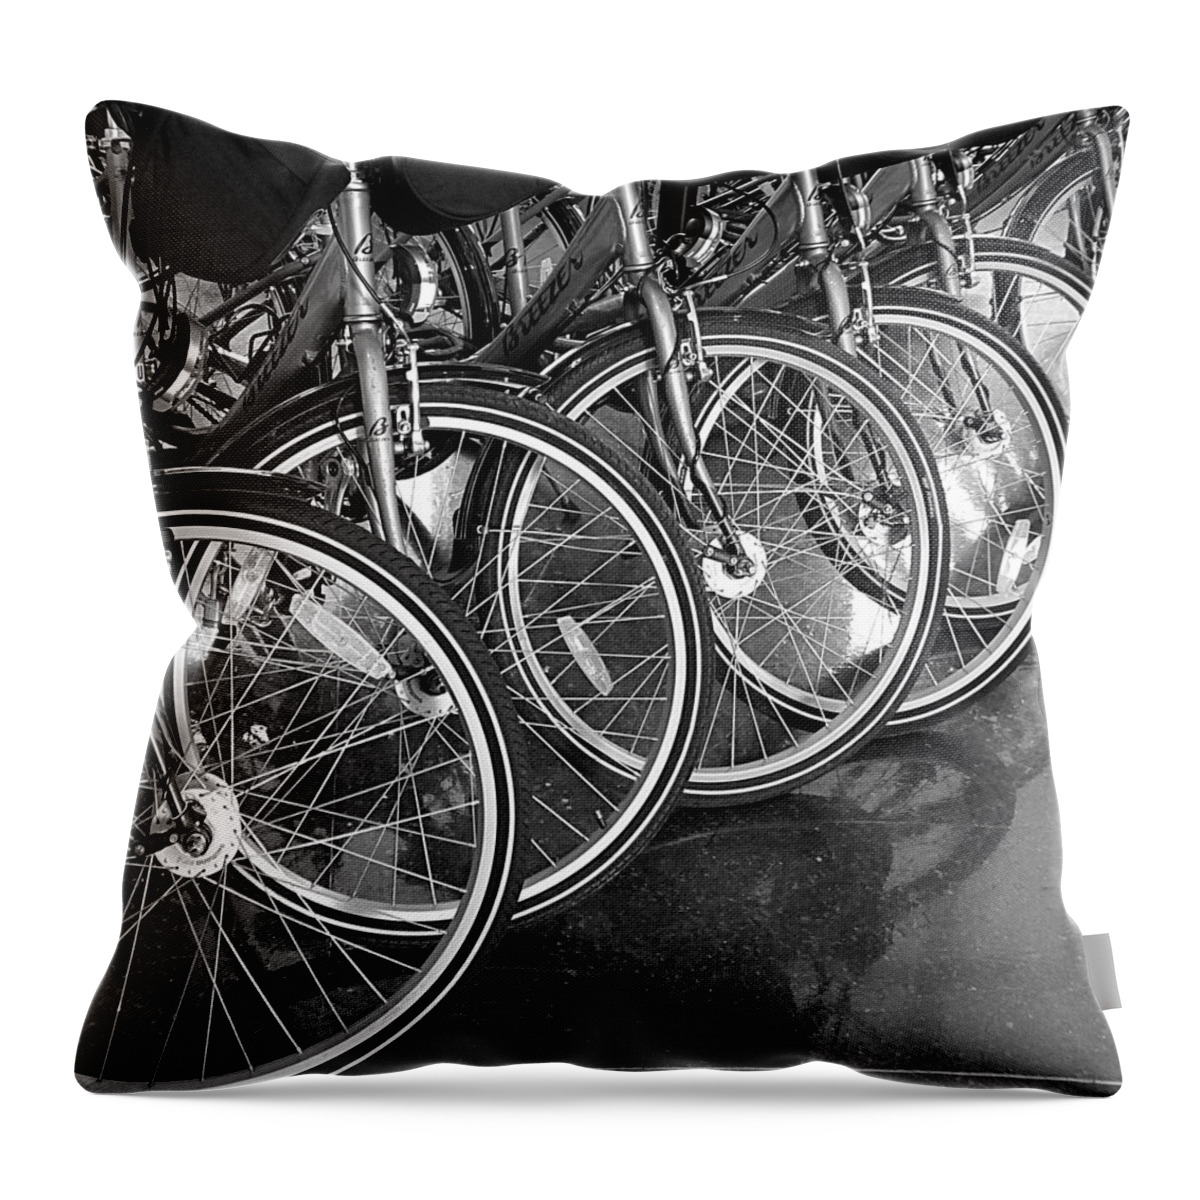 Abstract Throw Pillow featuring the photograph Abstract - These Wheels are Spoken For by Richard Reeve